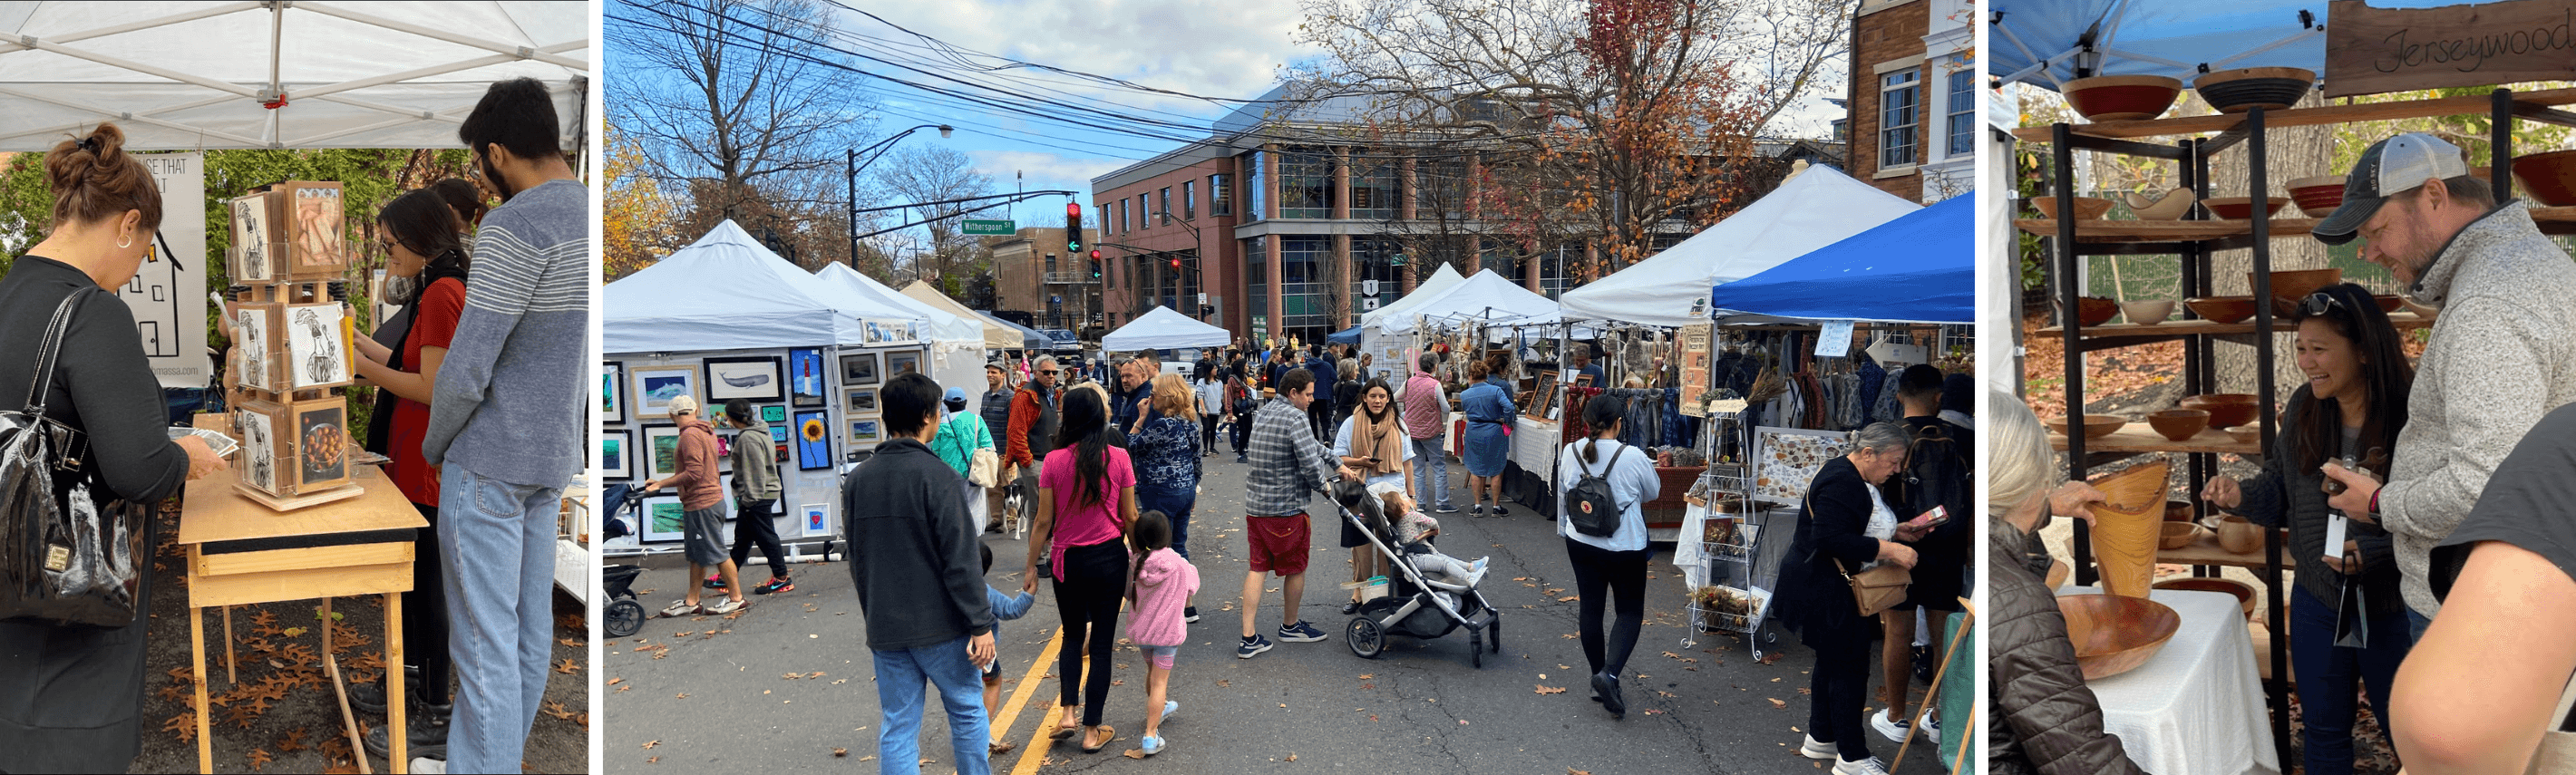 Sauce for the Goose: Outdoor Art Market